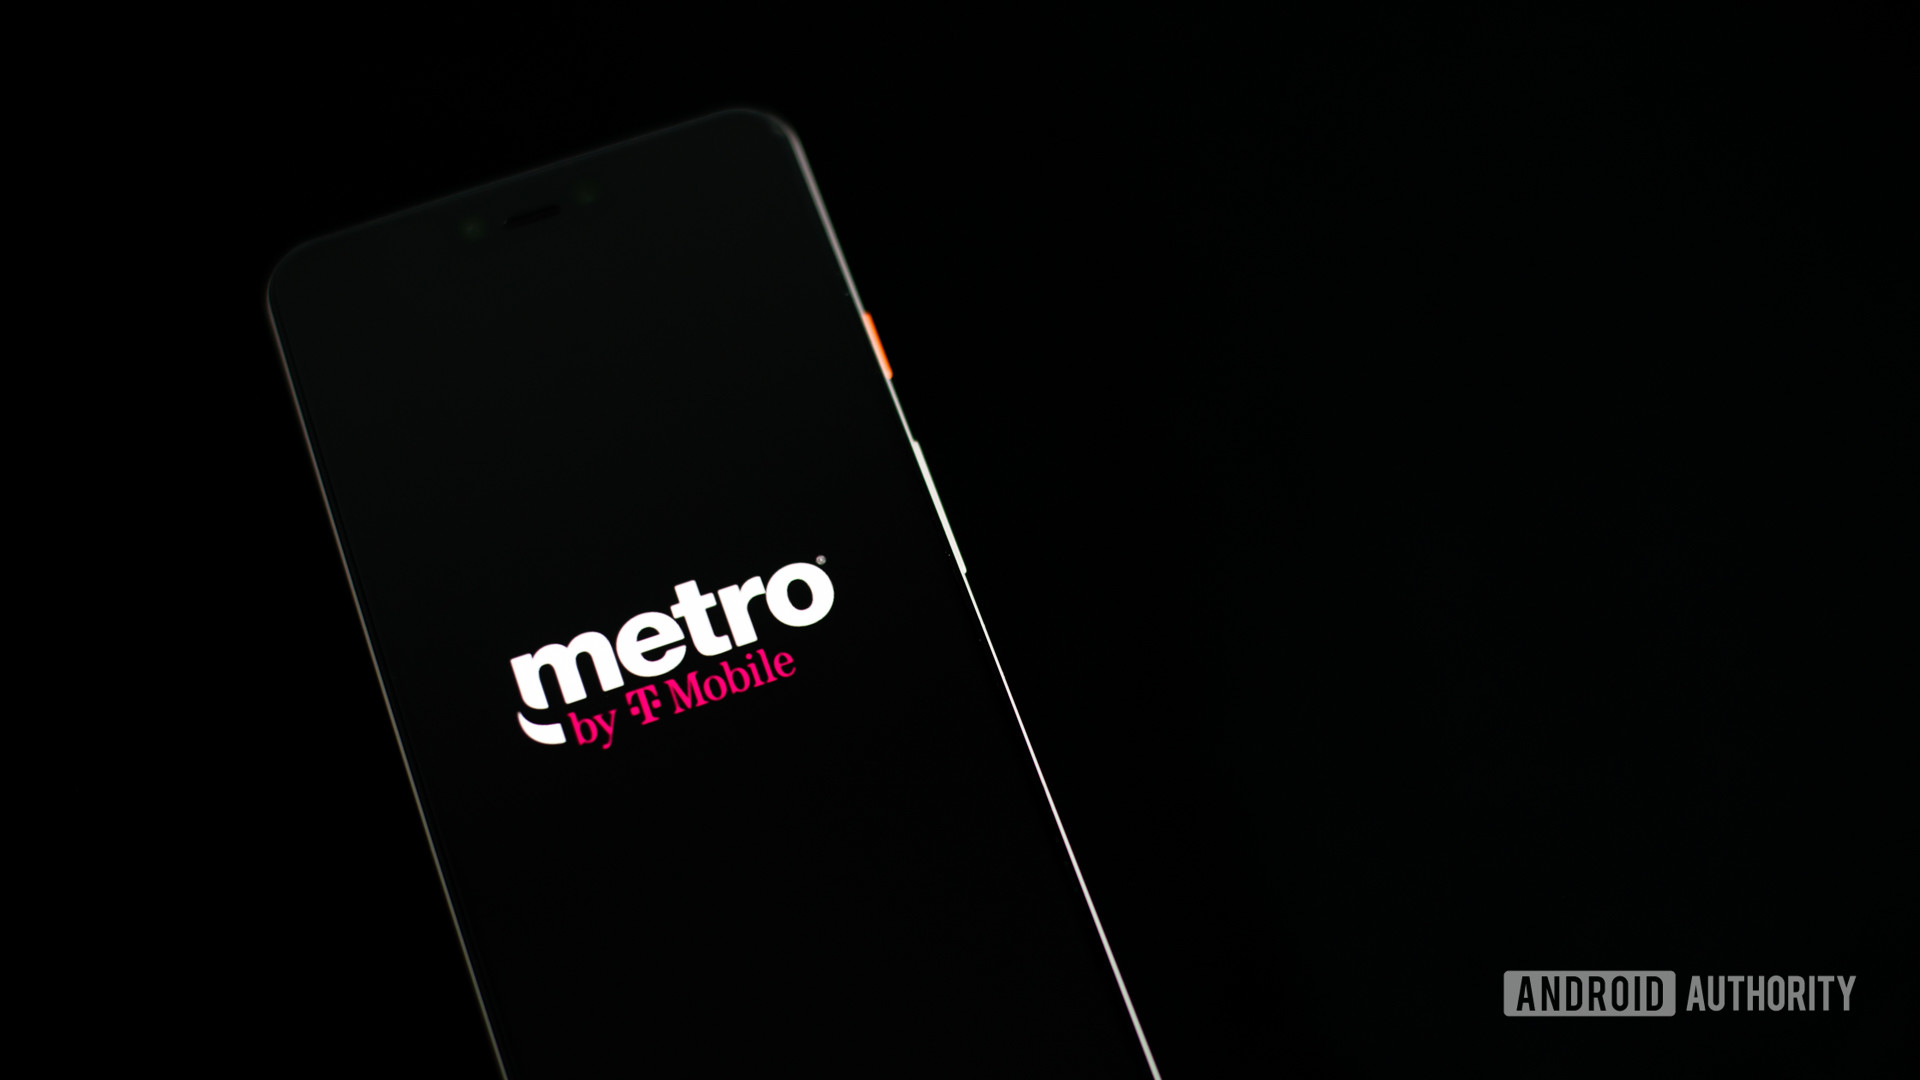 Metro By T Mobile徽标在电话库存照片2